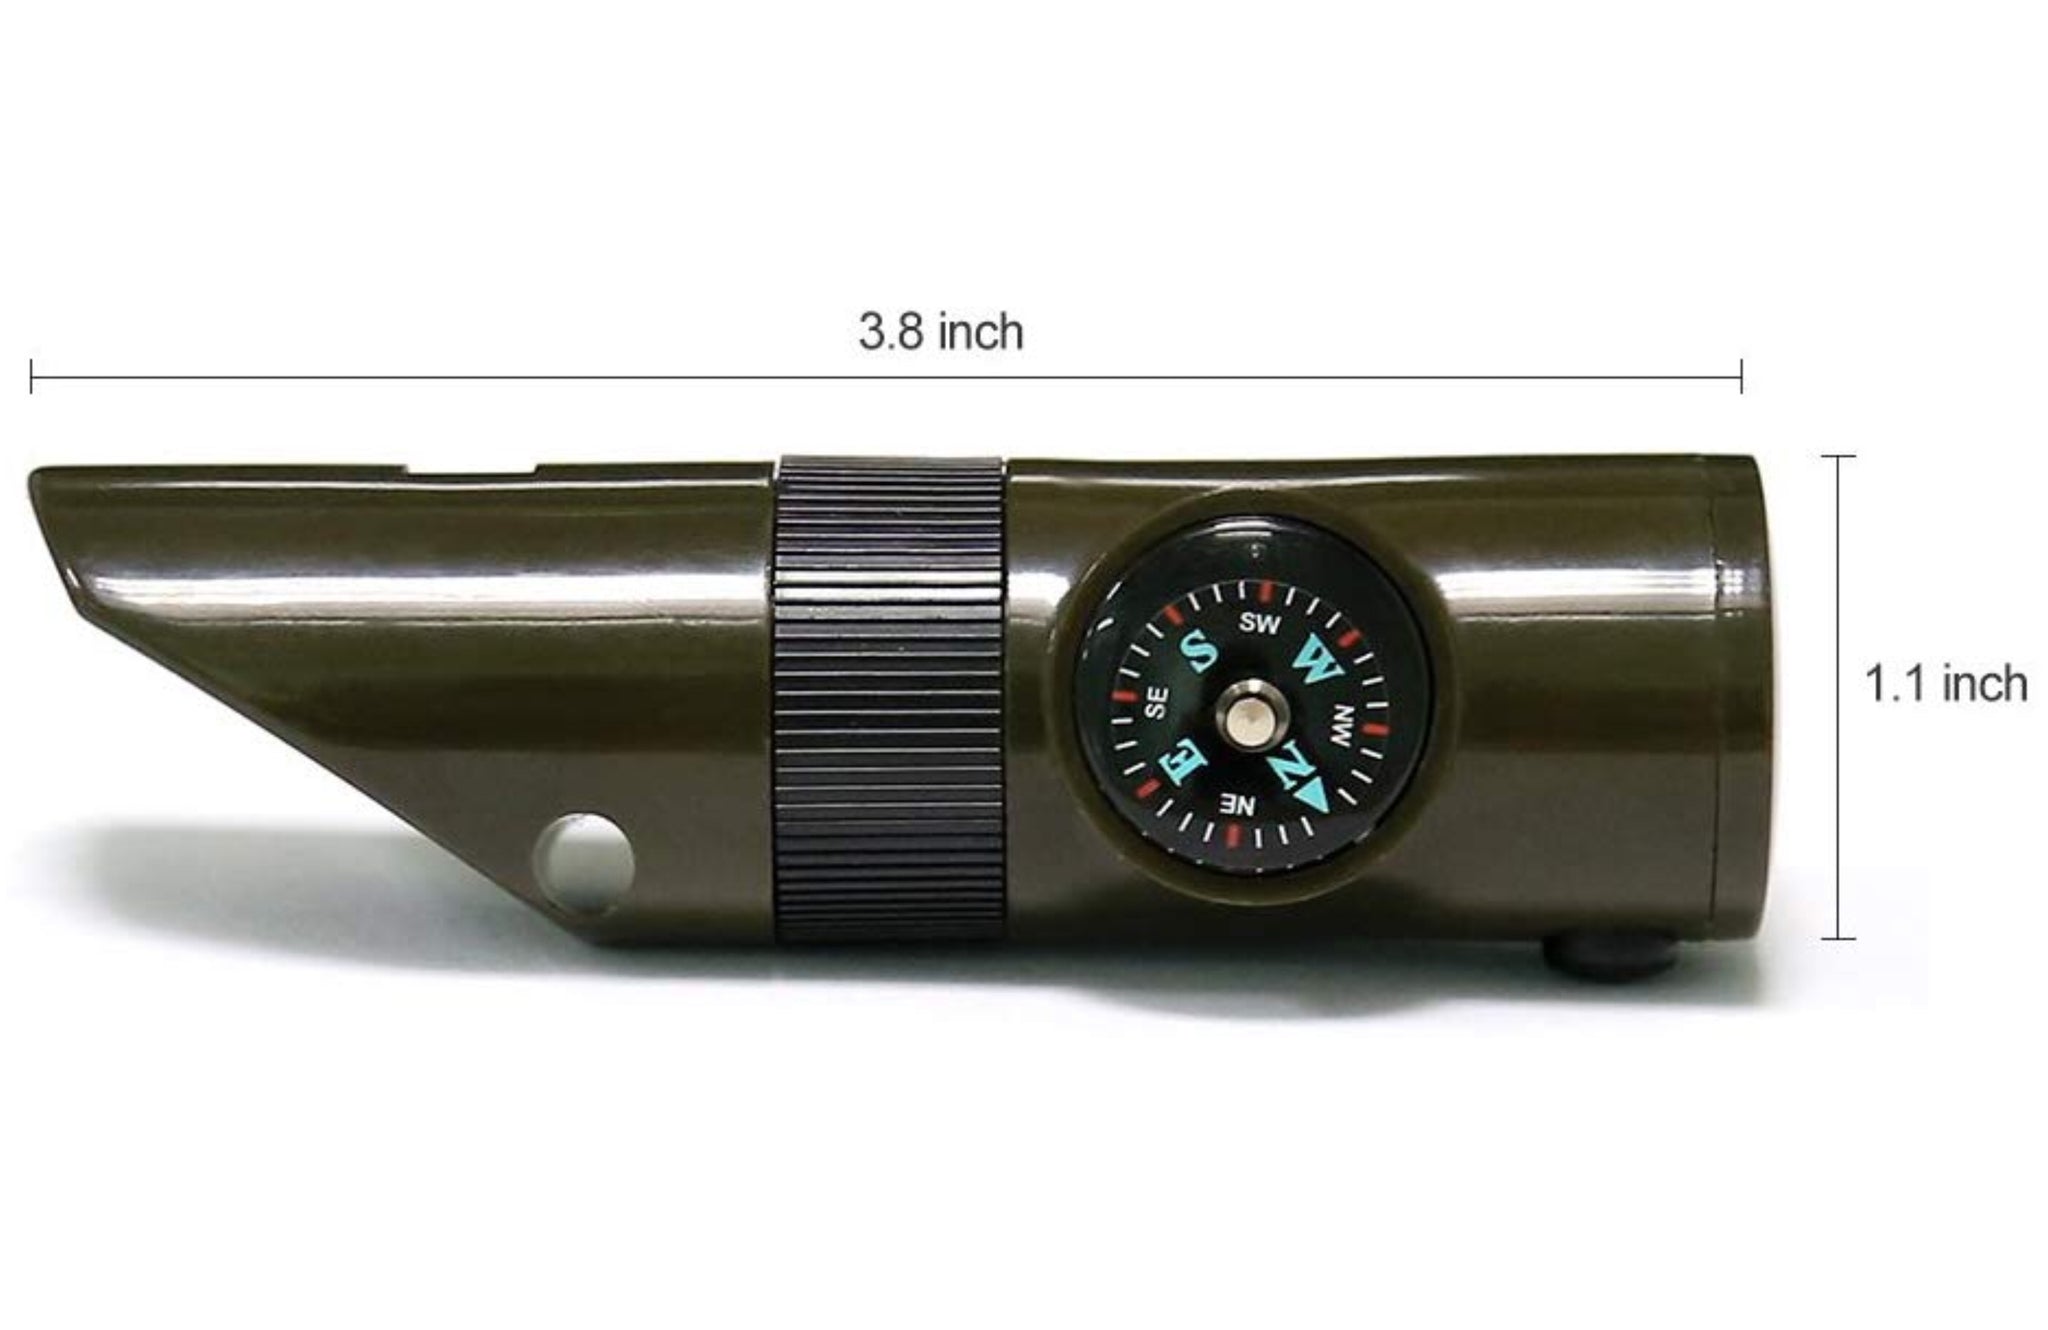 7 in 1 survival whistle